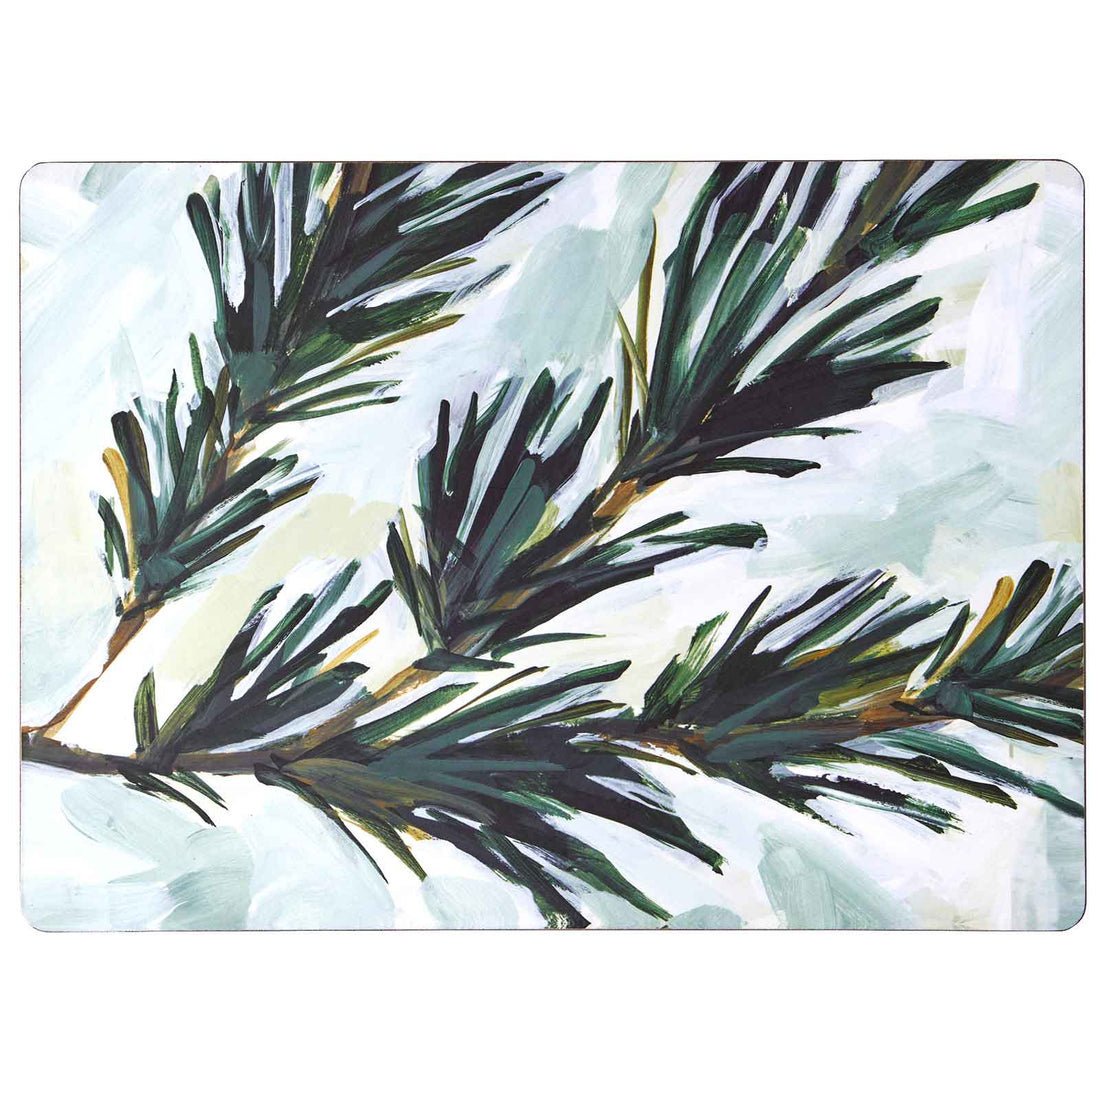 Abstract Spruce Branch Art Placemats - Set of 4 Placemat - rockflowerpaper